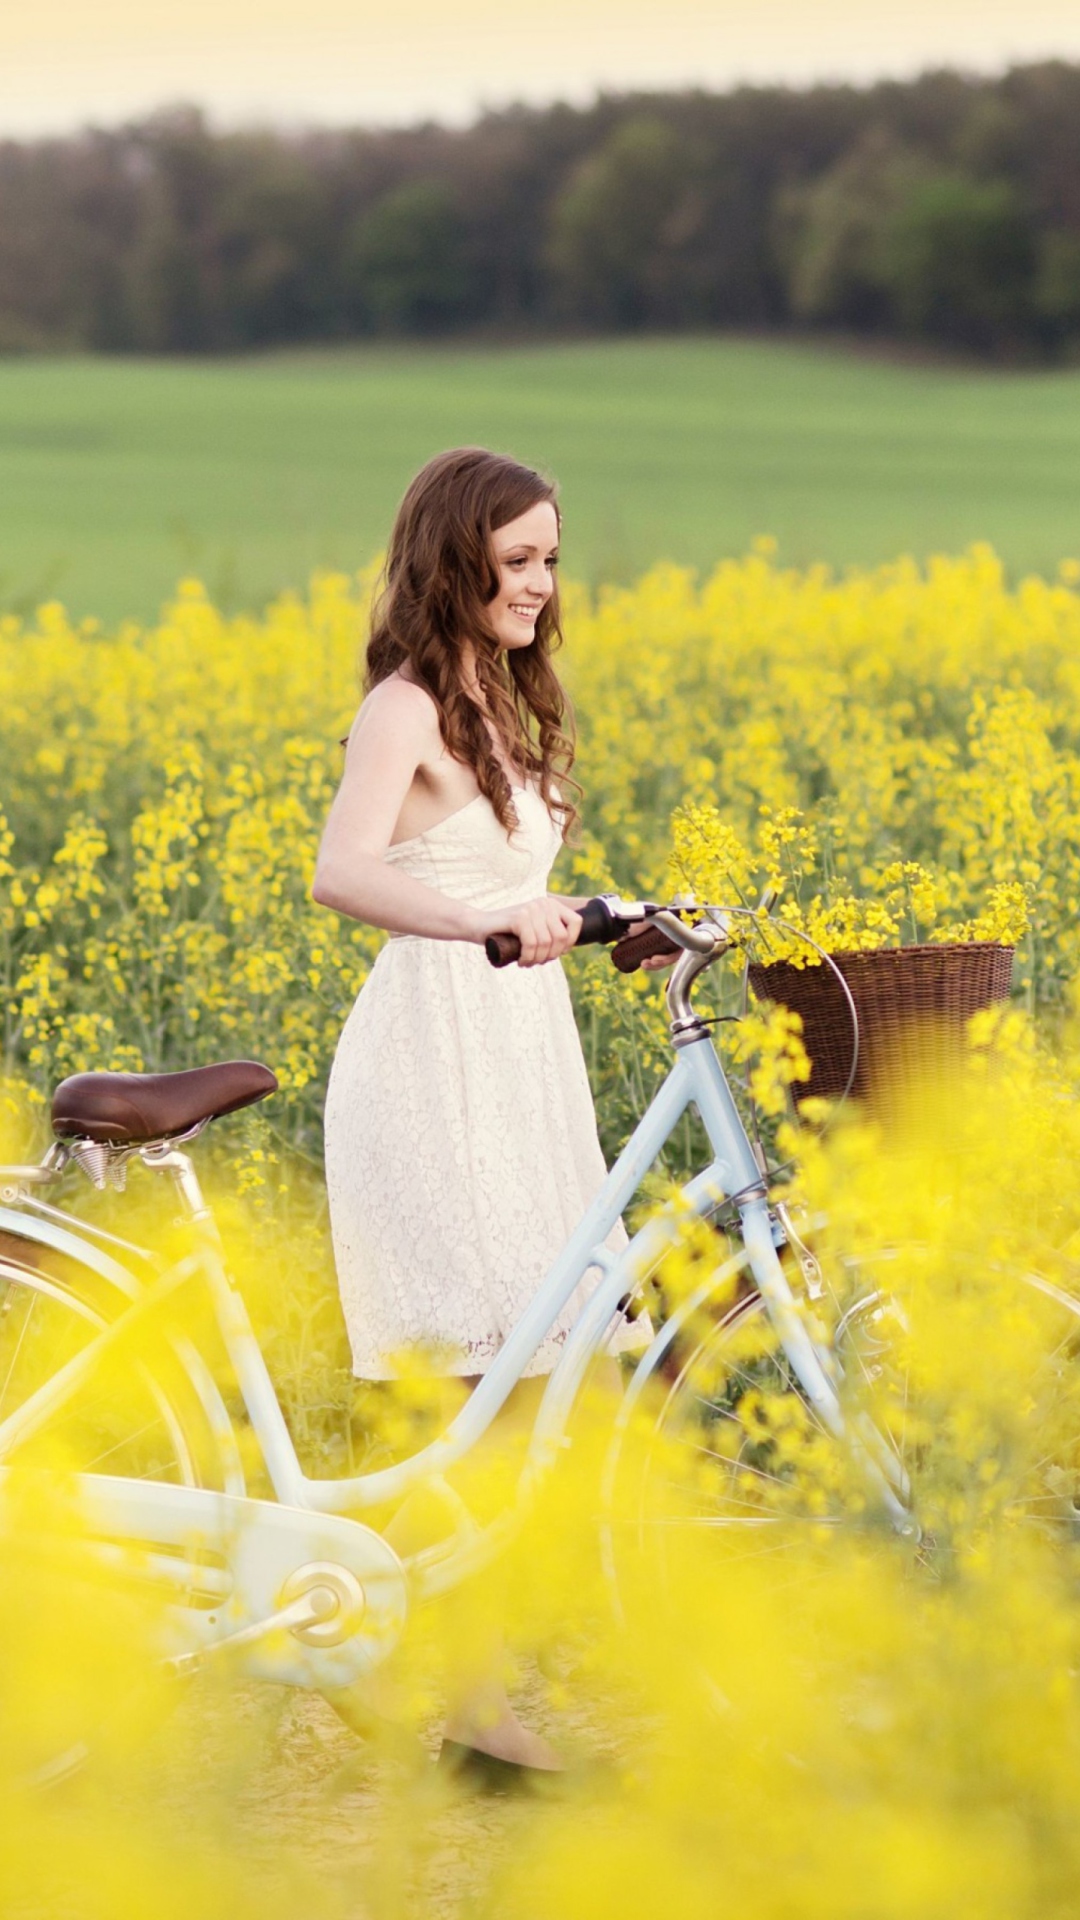 Das Girl With Bicycle In Yellow Field Wallpaper 1080x1920